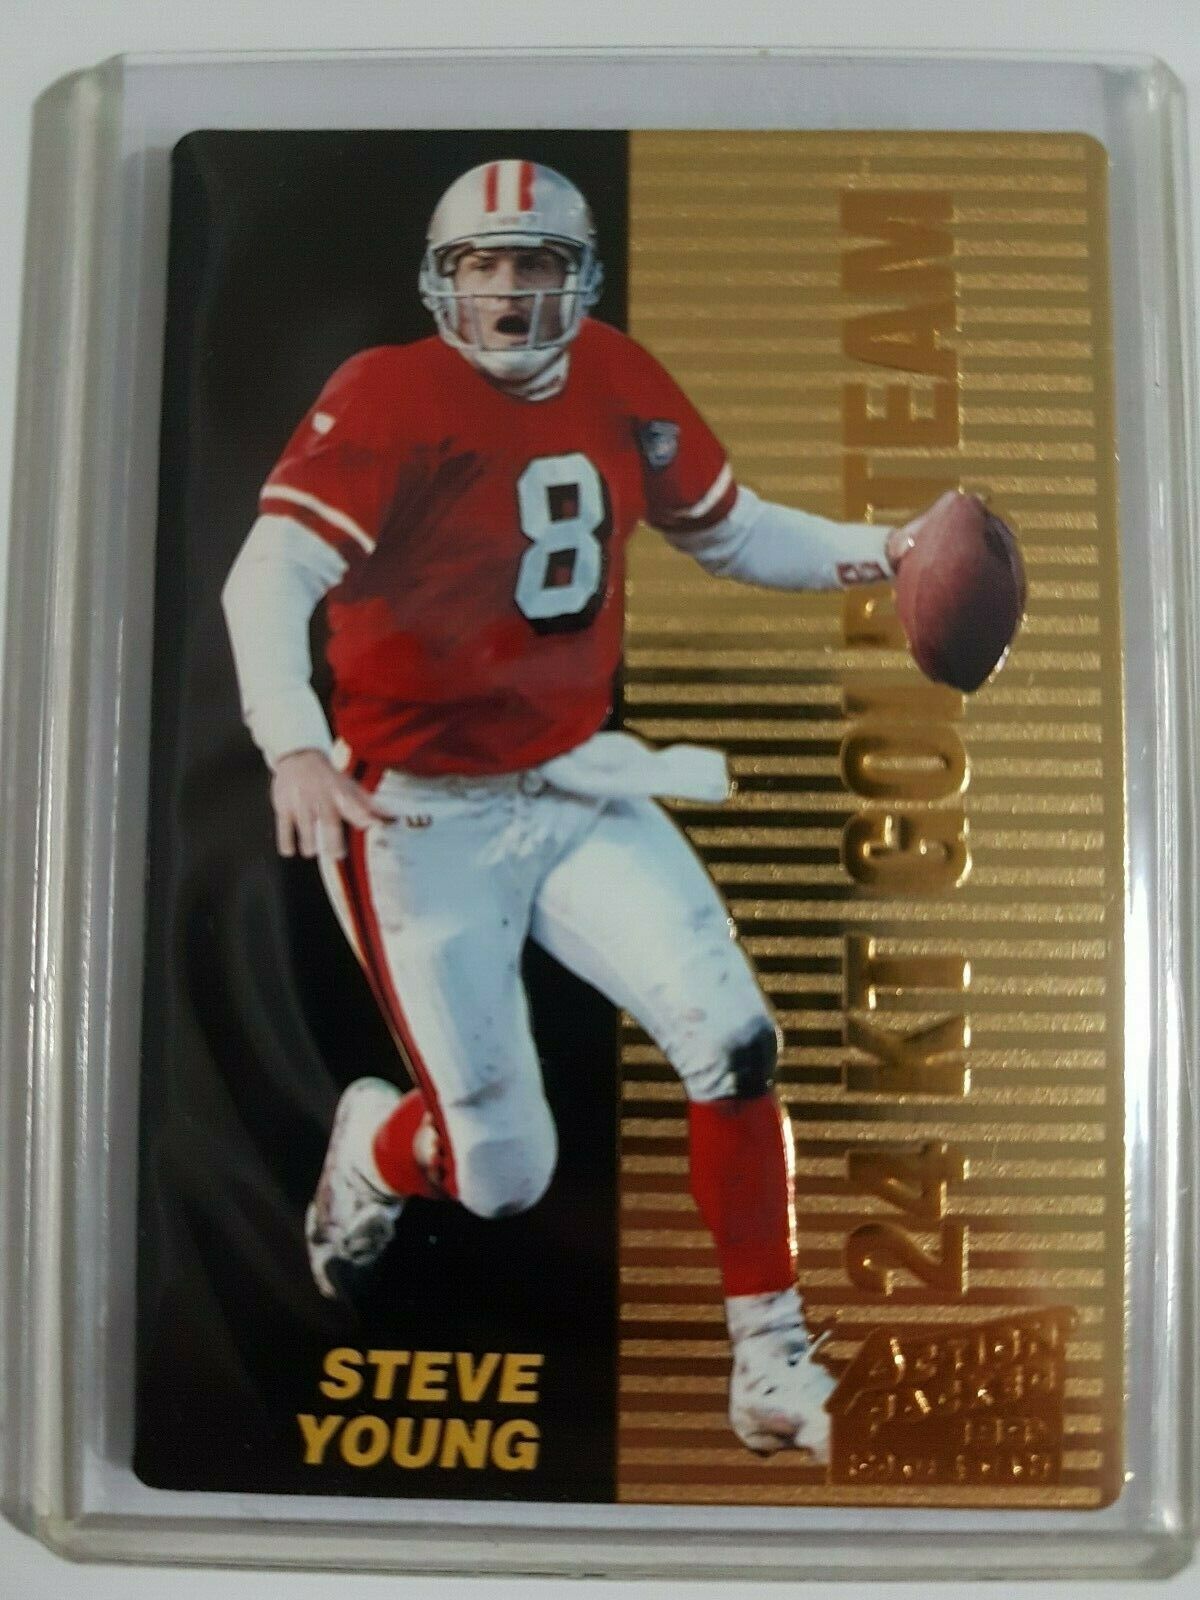 Steve Young - 1995 Action Packed Rookies/Stars 24kt GOLD TEAM #1 (49ers) Baseball cards value